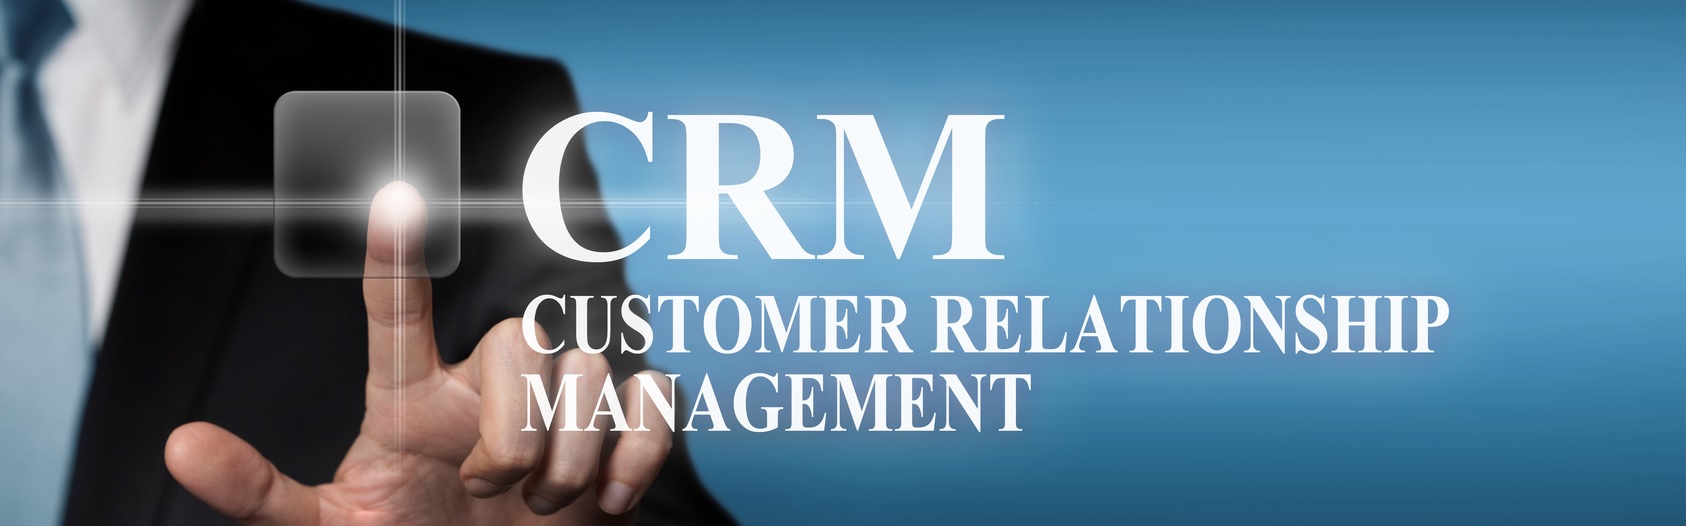 [CRM]Customer Relationship Management Course